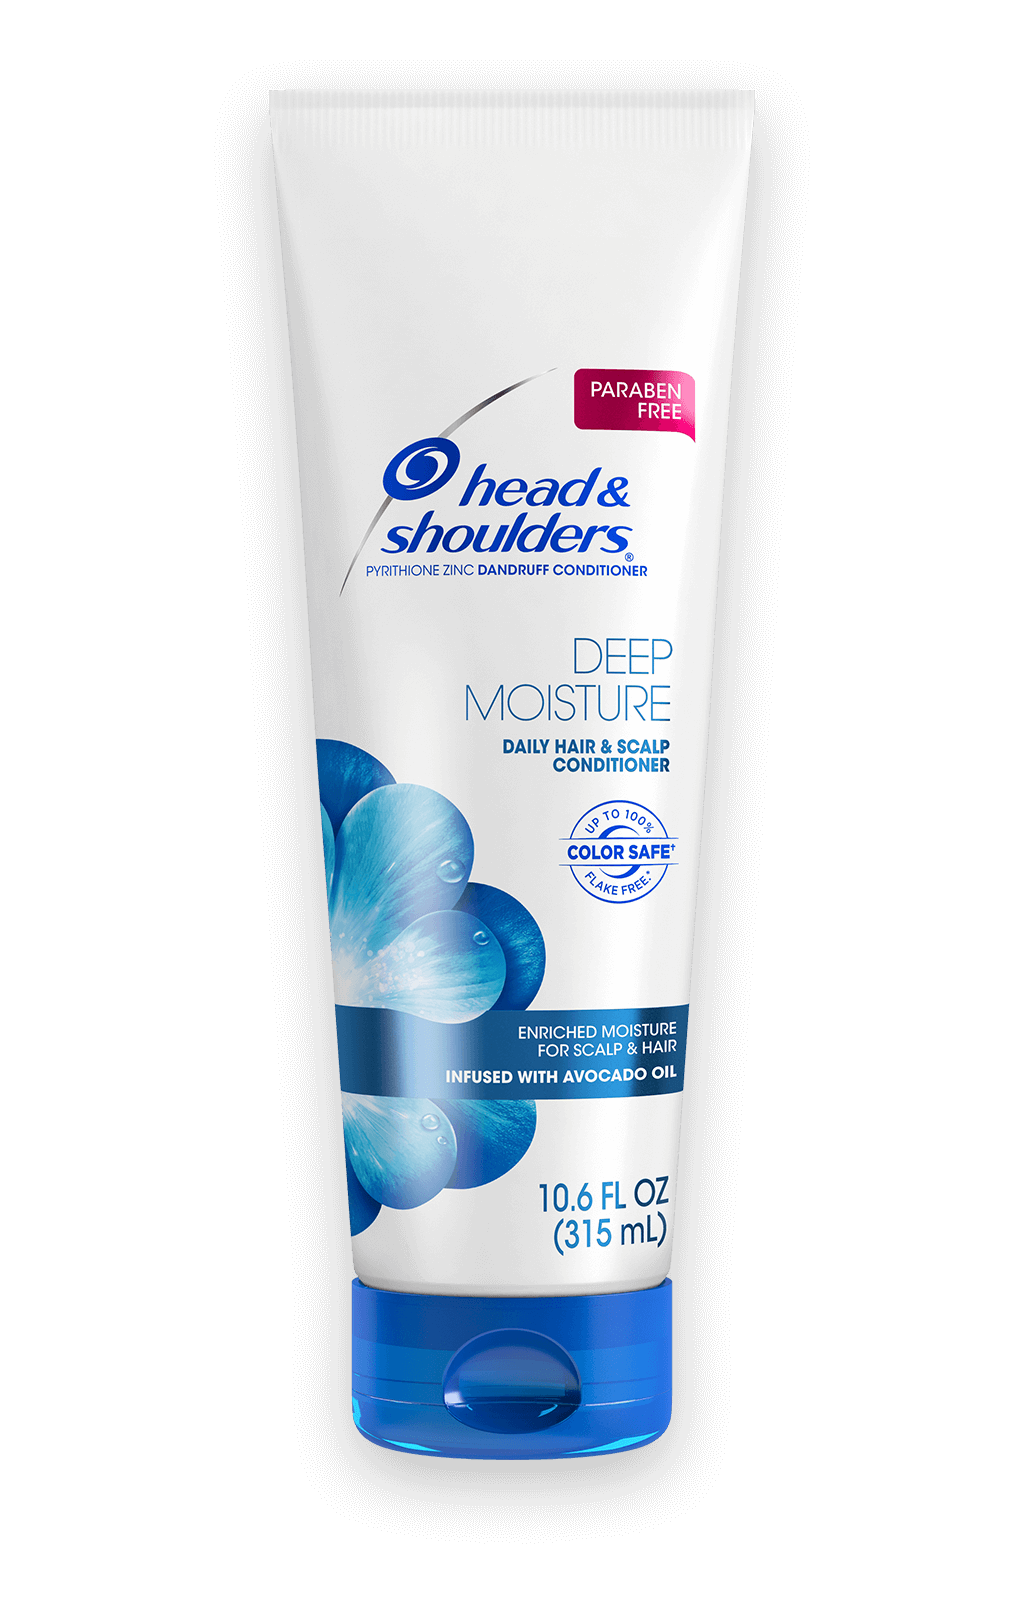 Head and Shoulders Deep Moisture Masque Conditioner Treatment, Anti Dandruff and Scalp Care, Royal Oils Collection with Coconut Oil, for Natural and Curly Hair, 7.6 fl oz